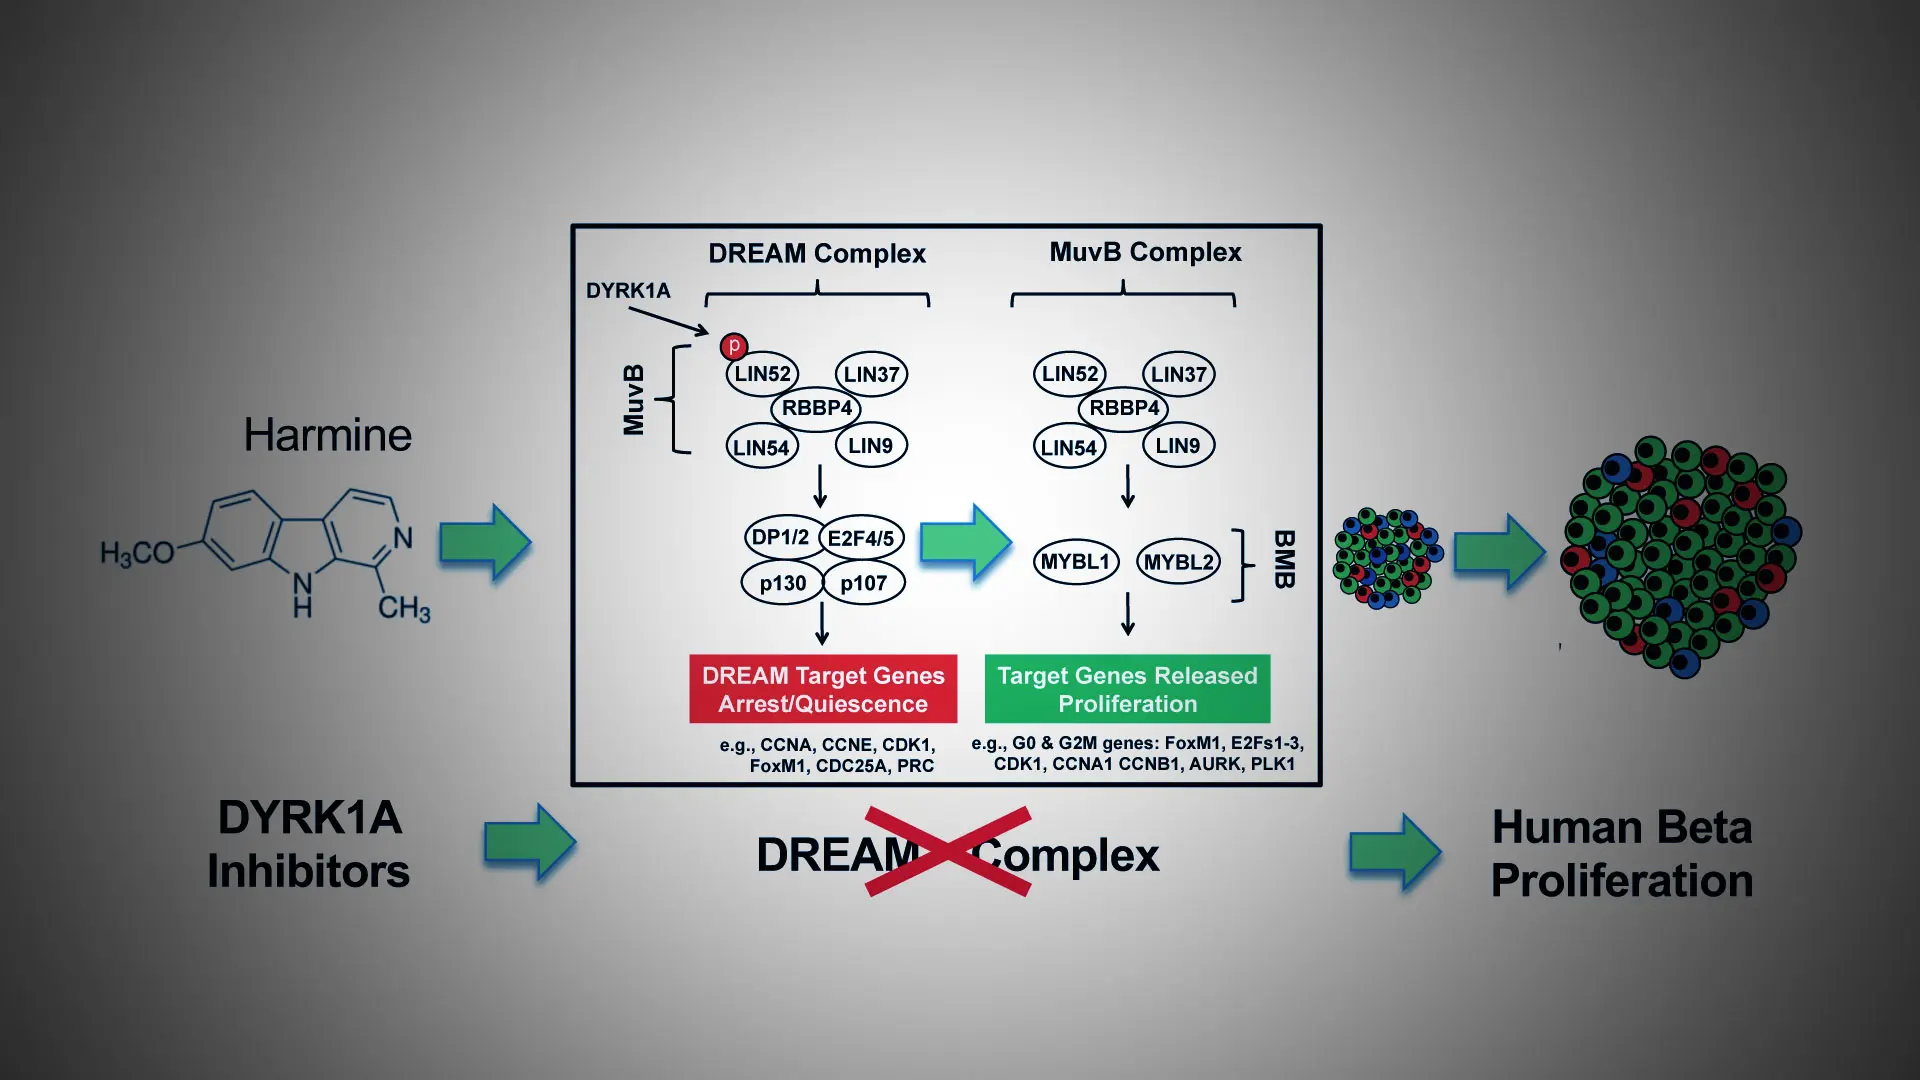 Disrupting the DREAM Complex Enables Proliferation of Adult Human Pancreatic Beta Cells